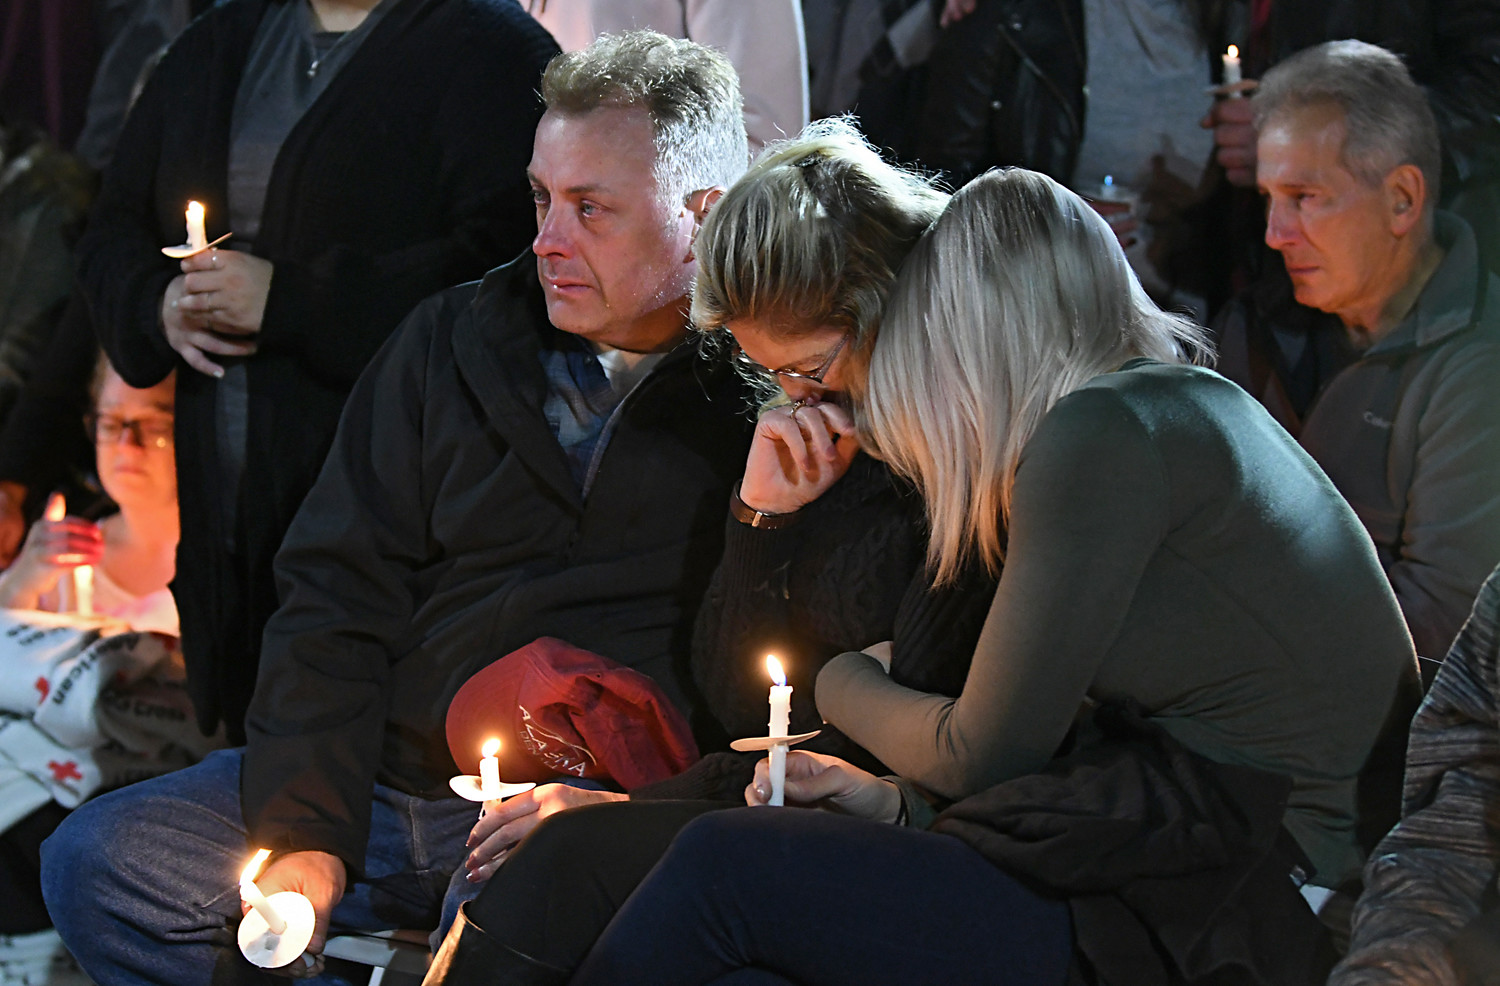 A victims family members mourn during a candlelight vigil Oct. 8 in Amsterdam, N.Y., for the victims of the limousine crash in Schoharie. The driver, Scott Lisincchia, 53, died in the Oct. 6 accident along with the 17 others inside the limousine and two pedestrians. It is the deadliest road accident in the United States in more than 13 years.